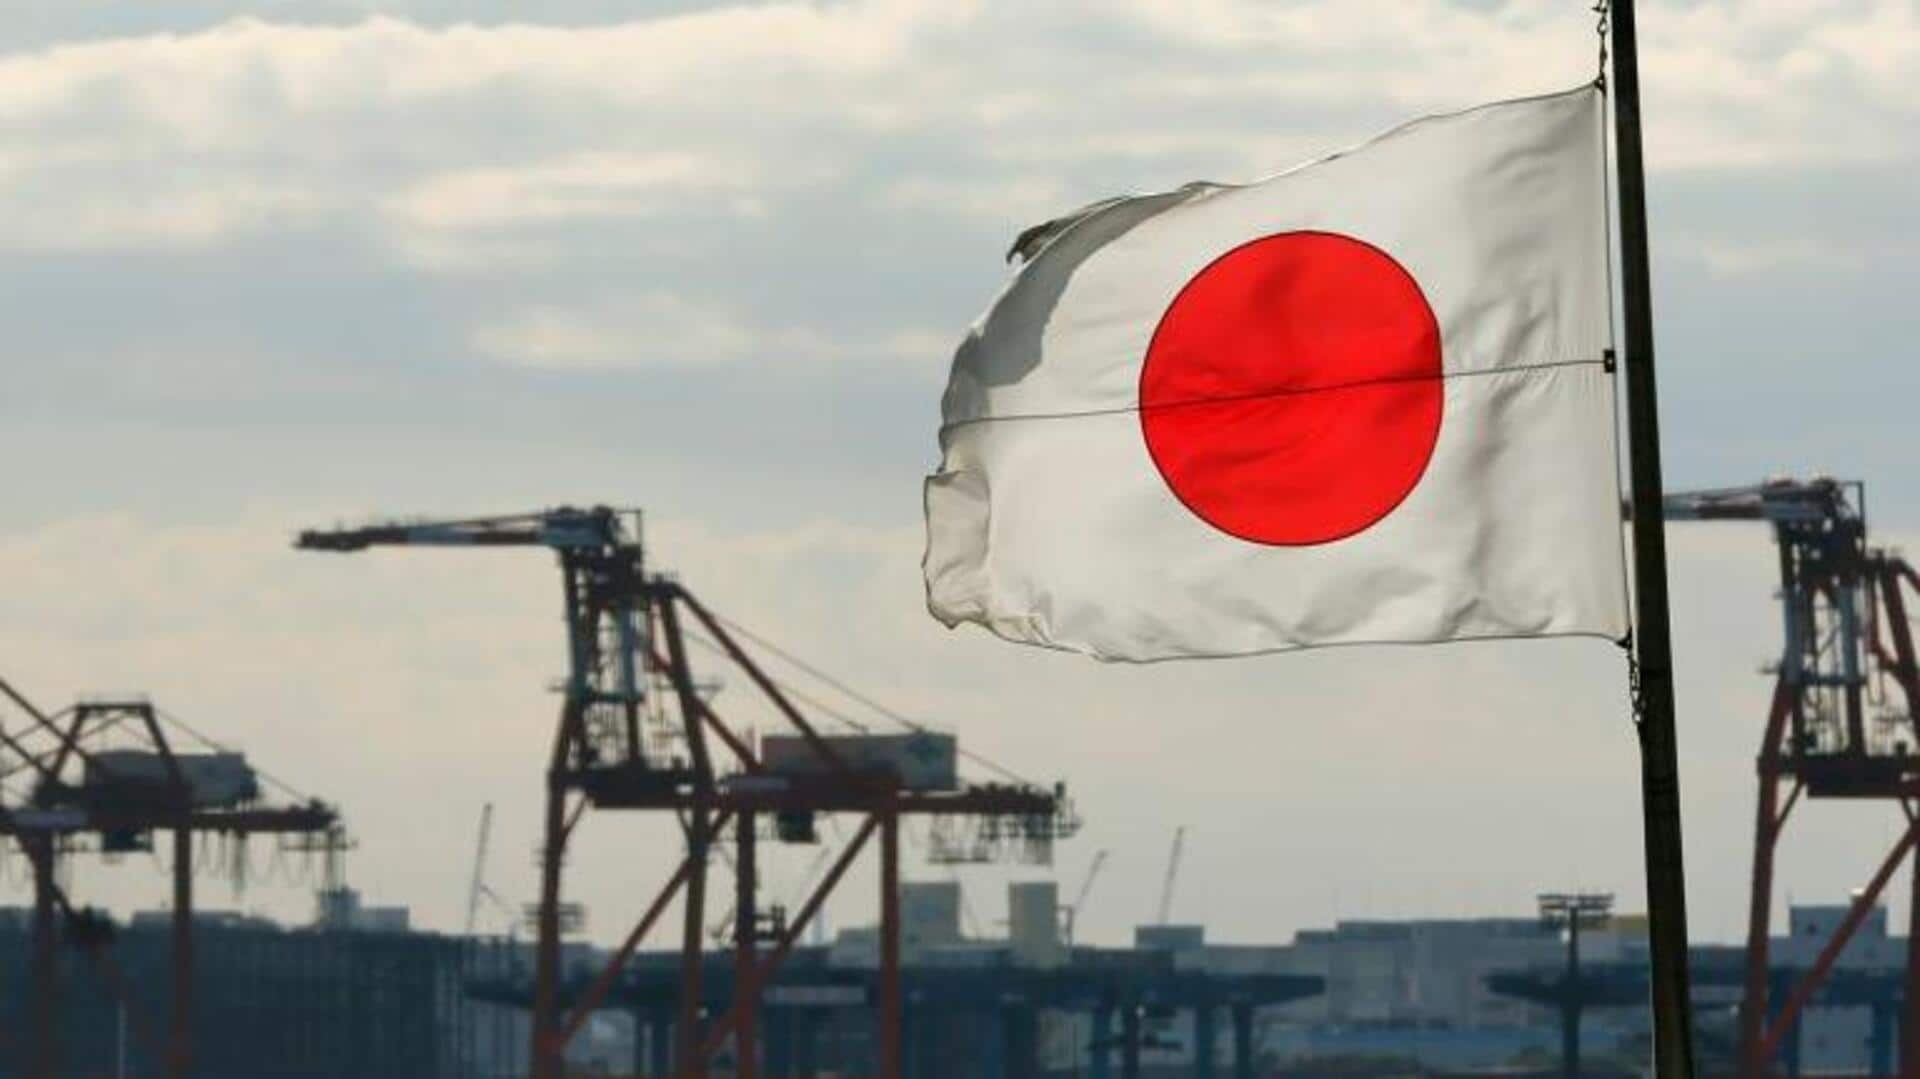 Japan's GDP shrinks over 2% amid high inflation